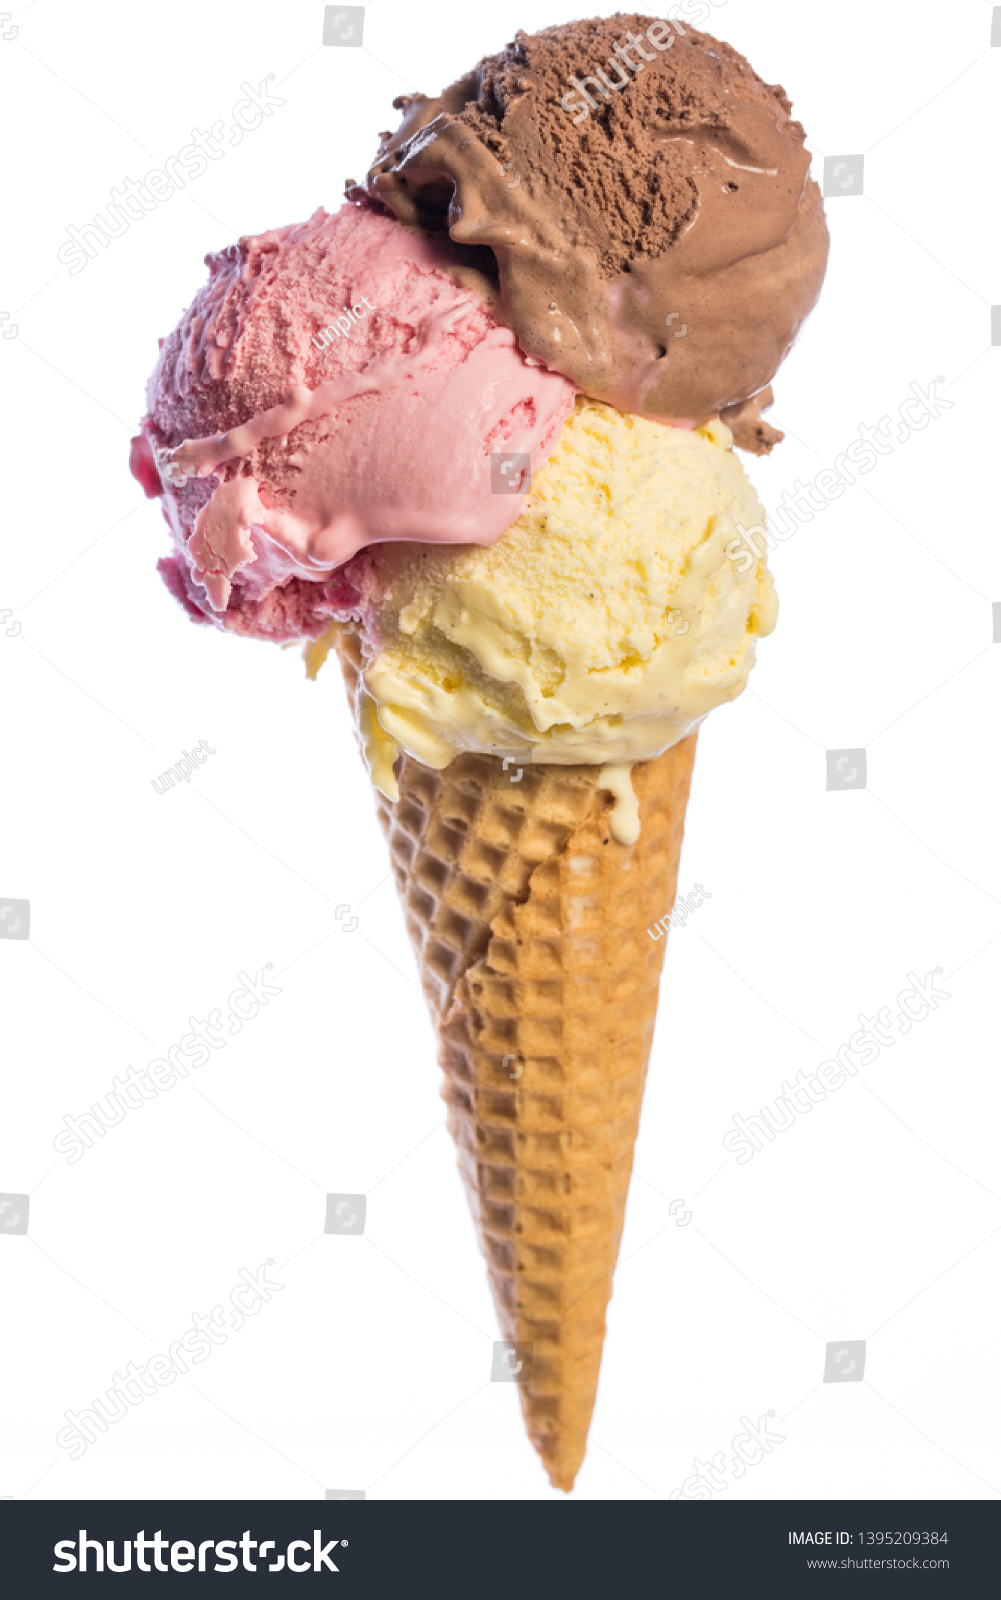 
front view of real edible ice cream cone with 3 different scoops of ice cream (vanilla, chocolate, strawberry) isolated on white background

real edible icecream, no artificial ingredients used! #1395209384